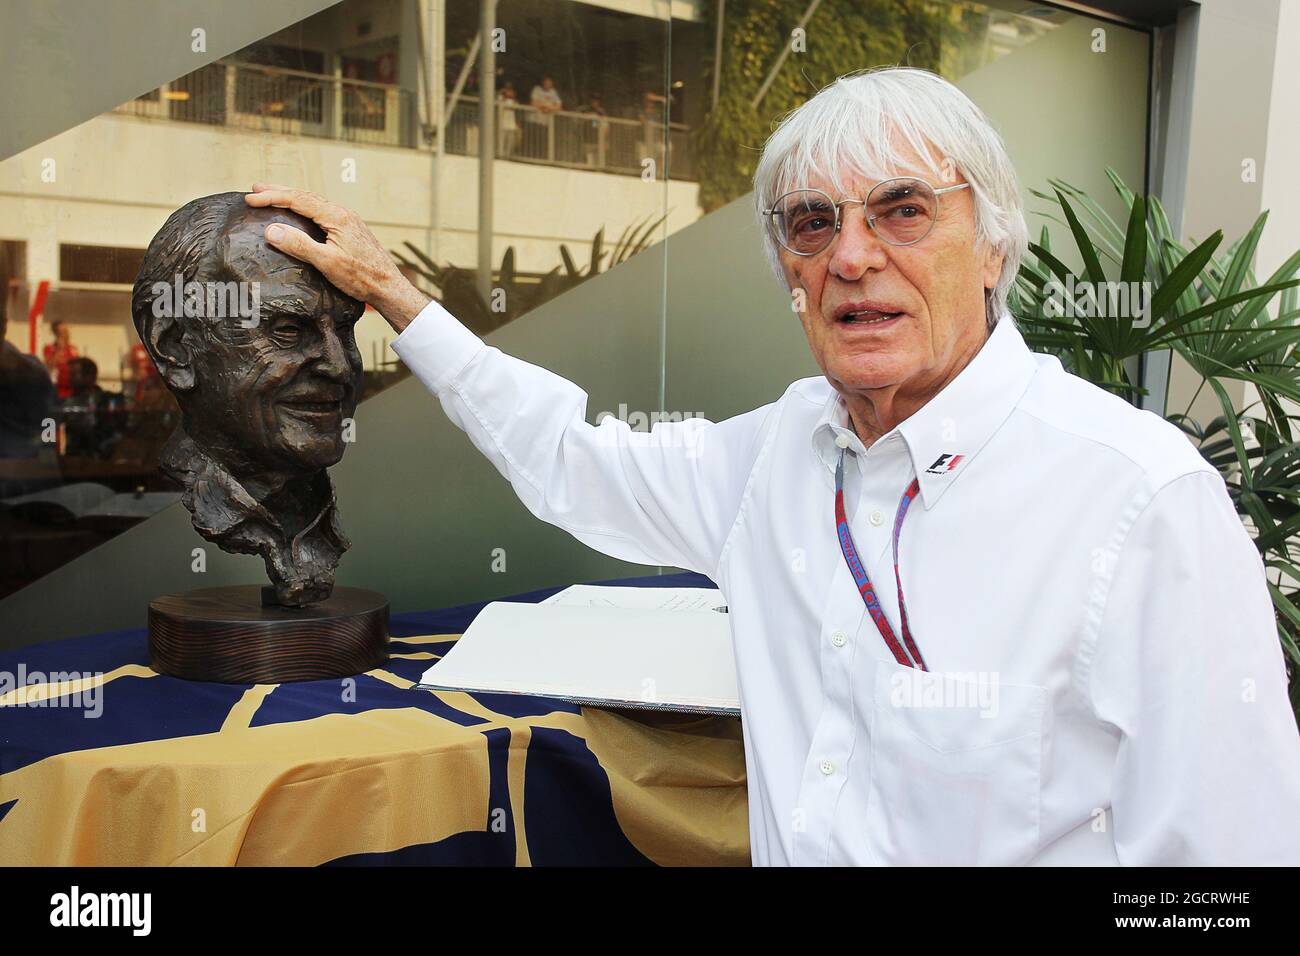 Bernie Ecclestone (GBR) CEO Formula One Group (FOM) pays his respects to the late Sid Watkins (GBR) Former FIA Safety Delegate. Singapore Grand Prix, Saturday 22nd September 2012. Marina Bay Street Circuit, Singapore. Stock Photo